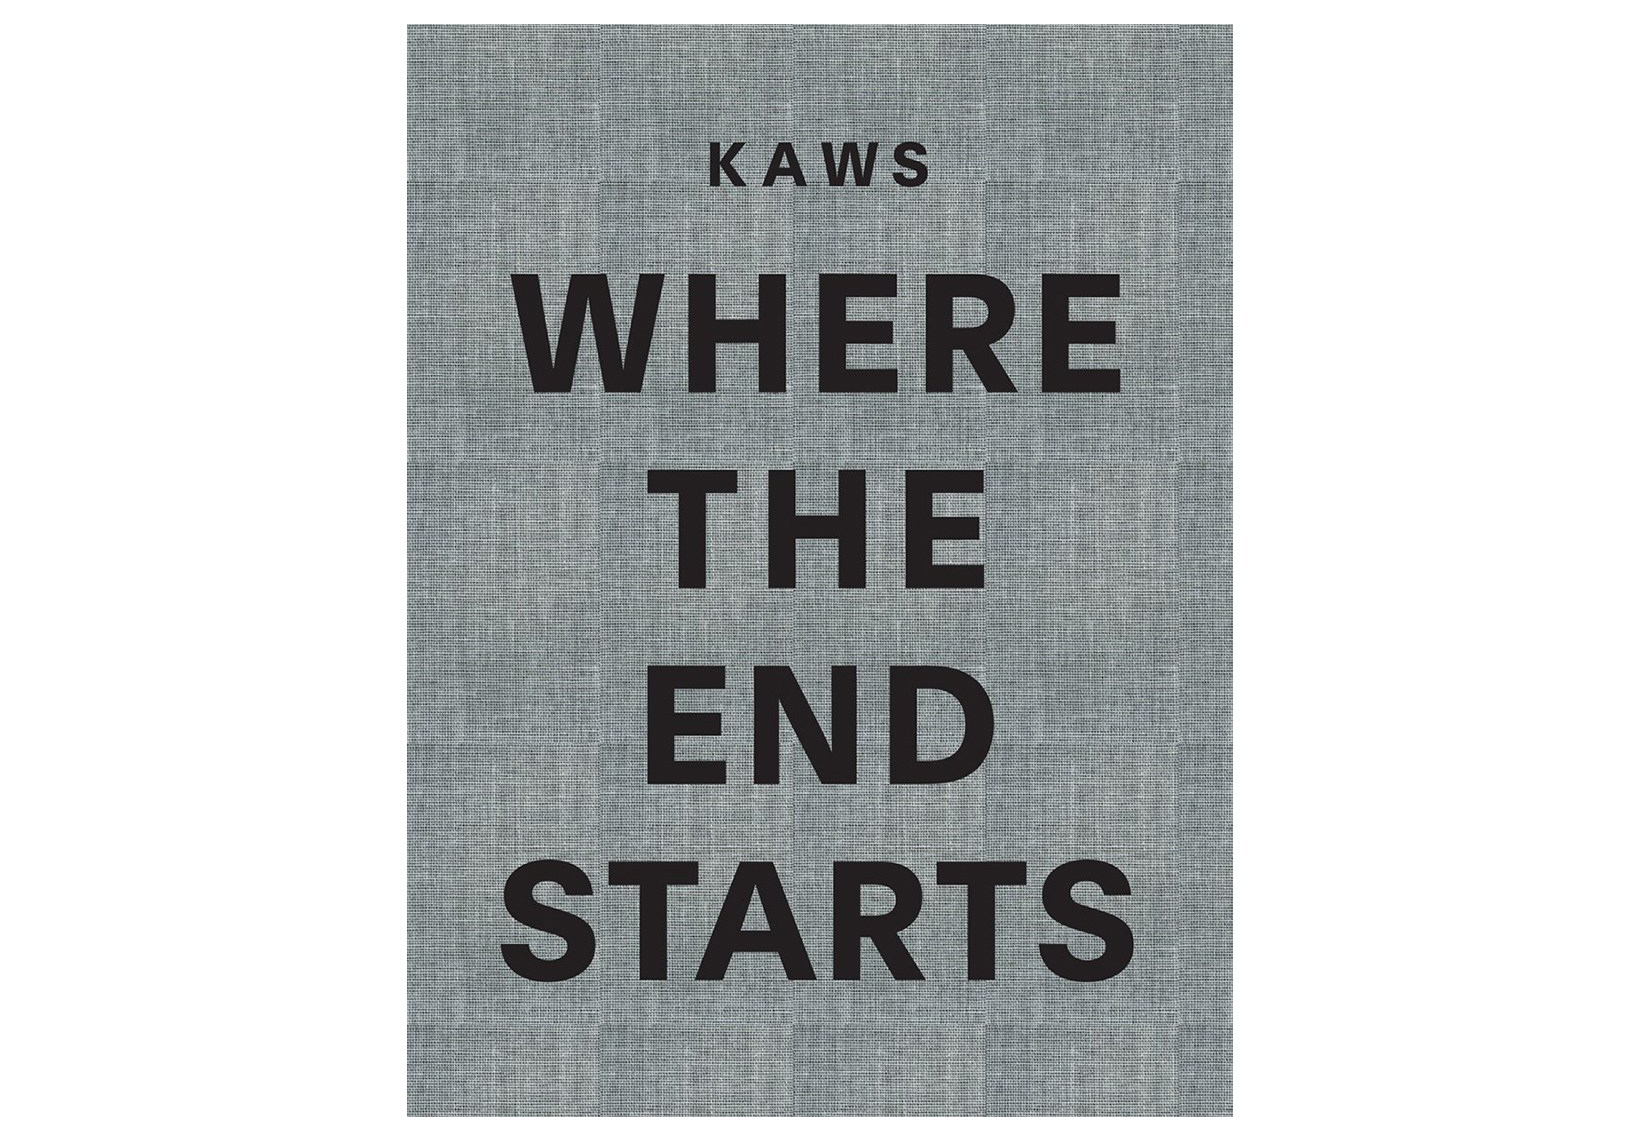 New start the end. End start бренд. Книга KAWS. End start что за бренд. Start booklet.